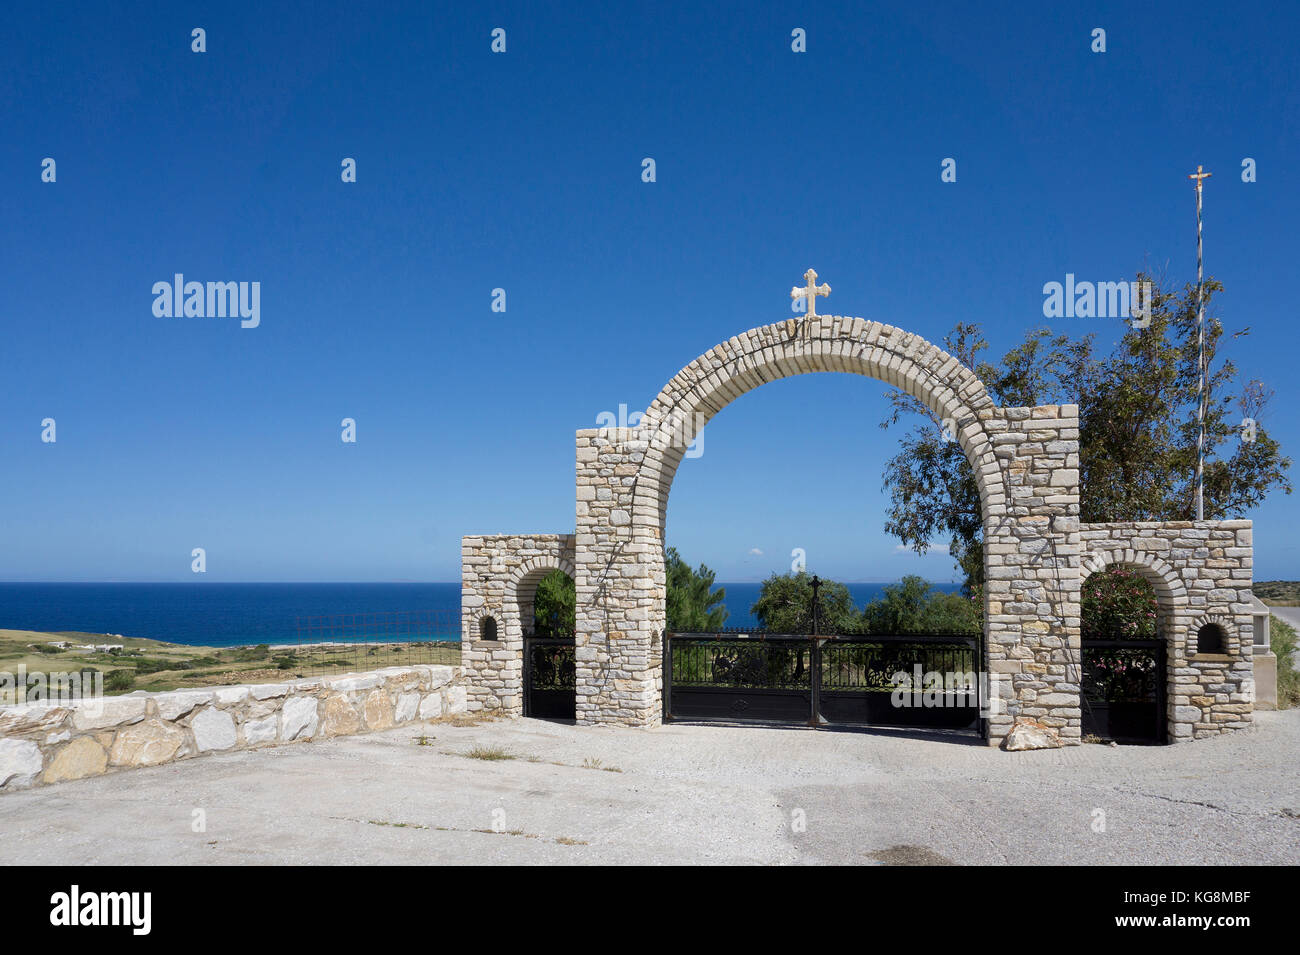 Gate, access to Monastery Faneromenis, north side of Naxos island, Cyclades, Aegean, Greece Stock Photo